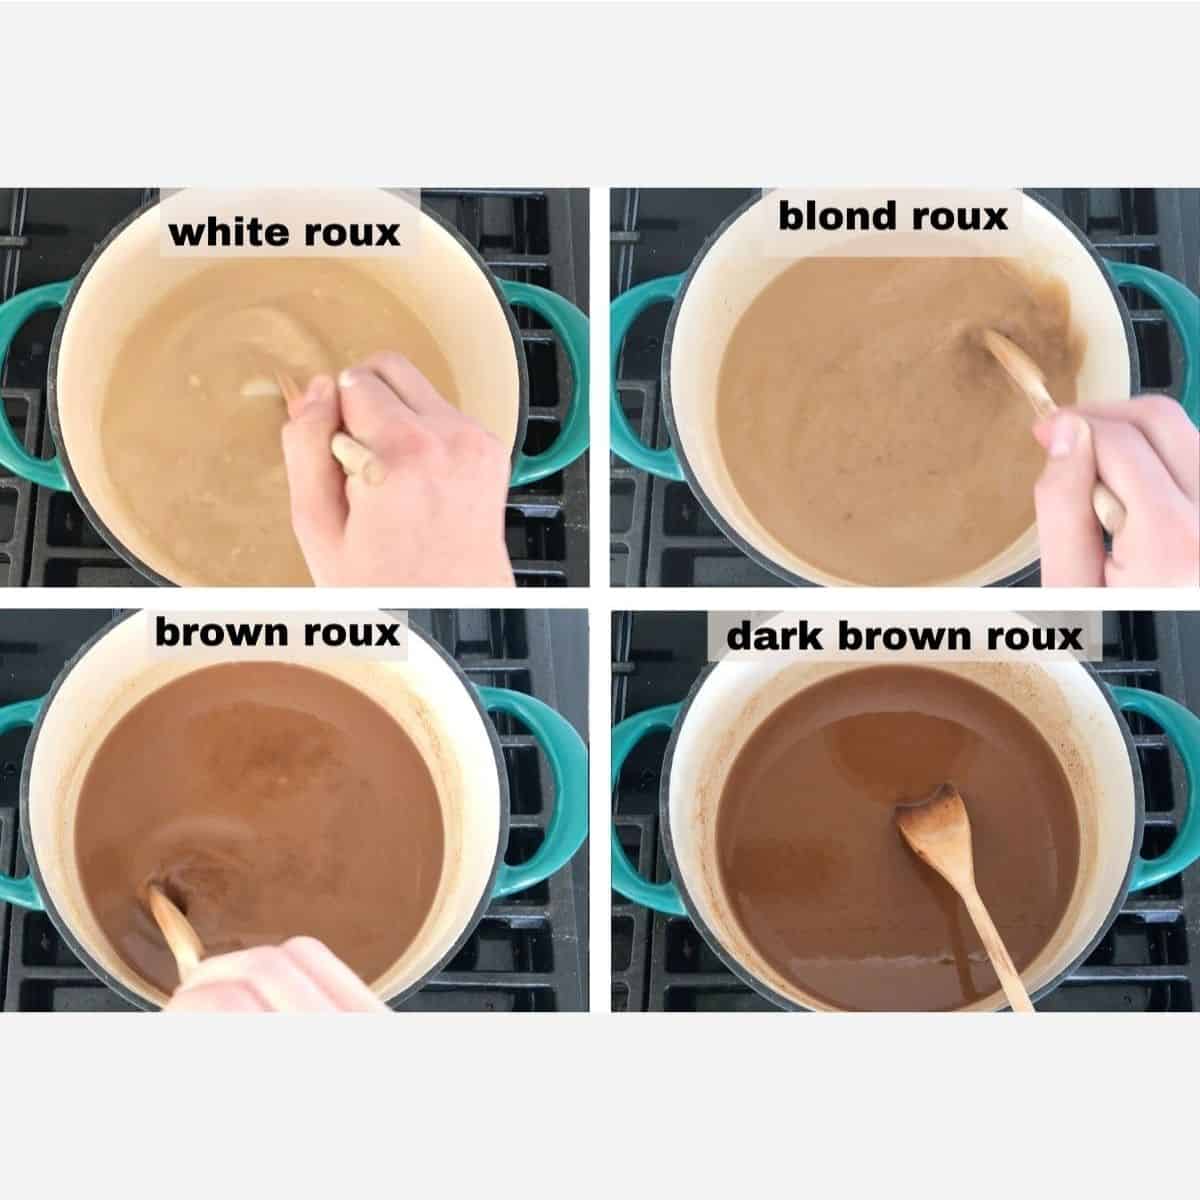 4 stages of browning a roux.